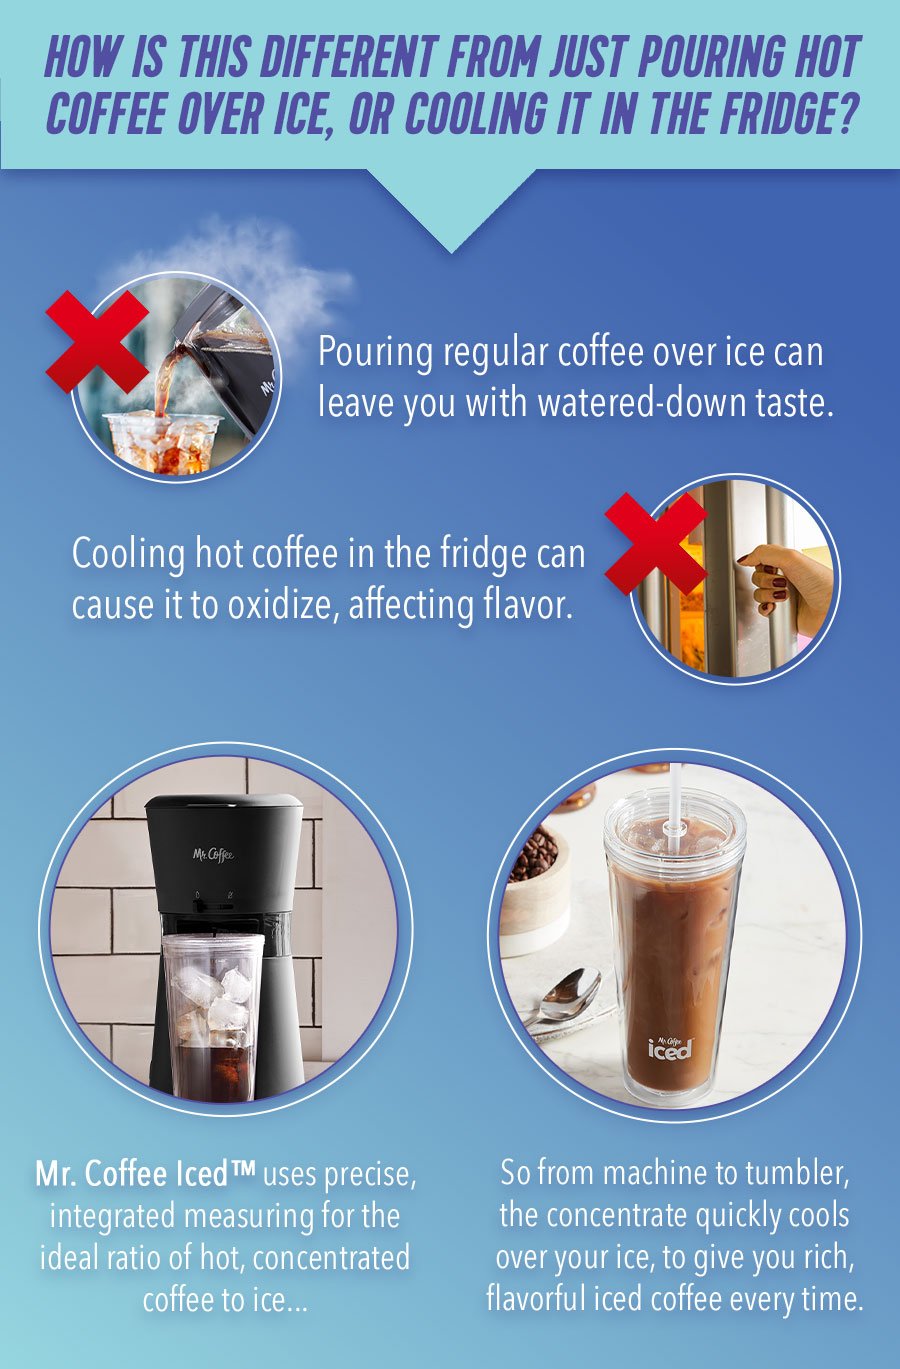 MR COFFEE Iced + Hot Frappe Coffee Maker Comparison 